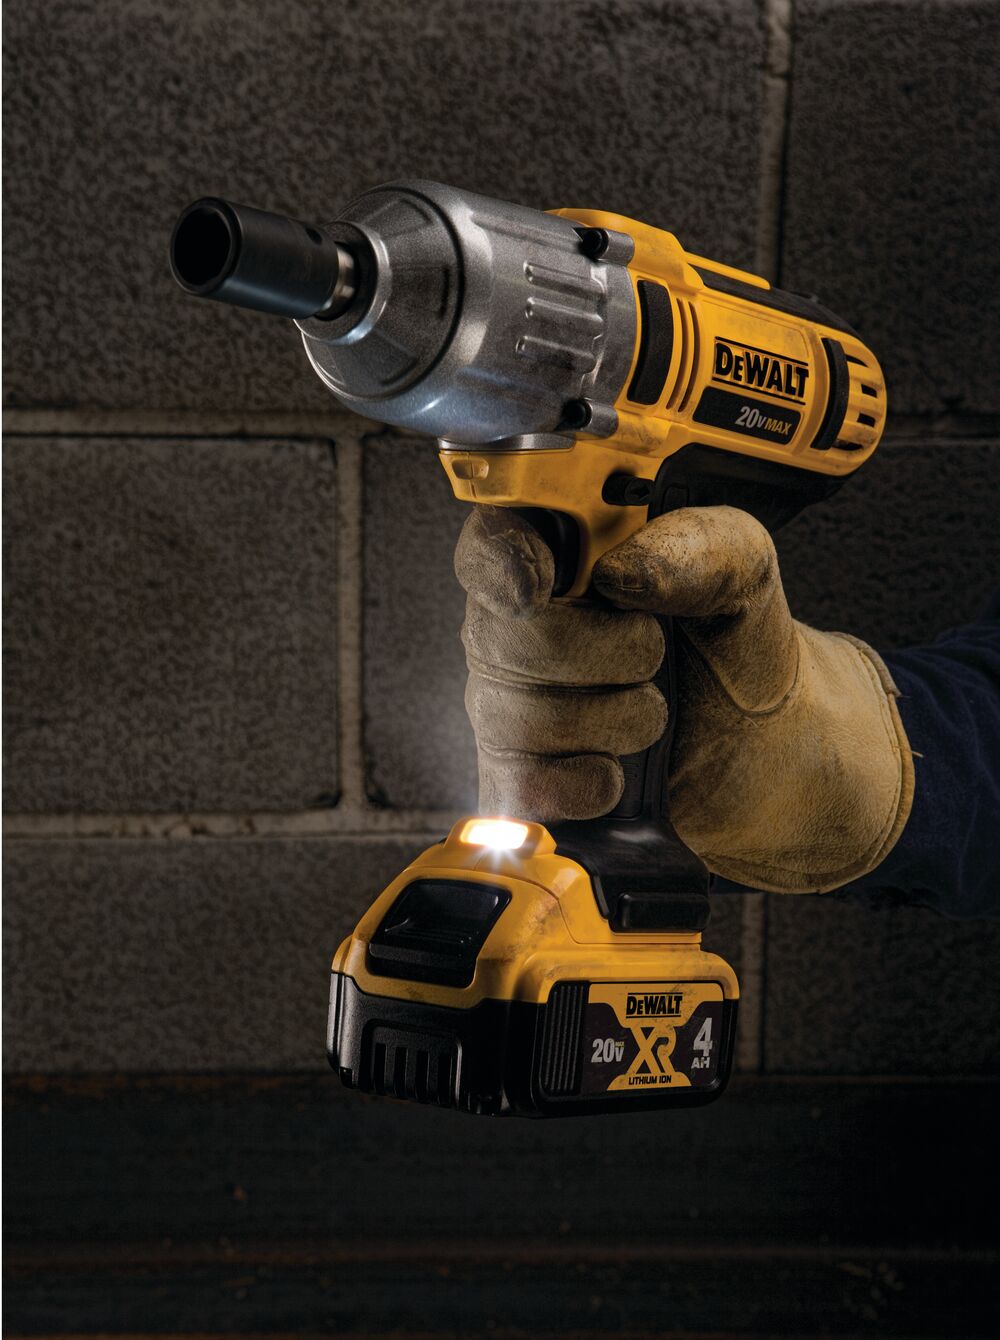 HIGH TORQUE IMPACT WRENCH with a LED light turned on